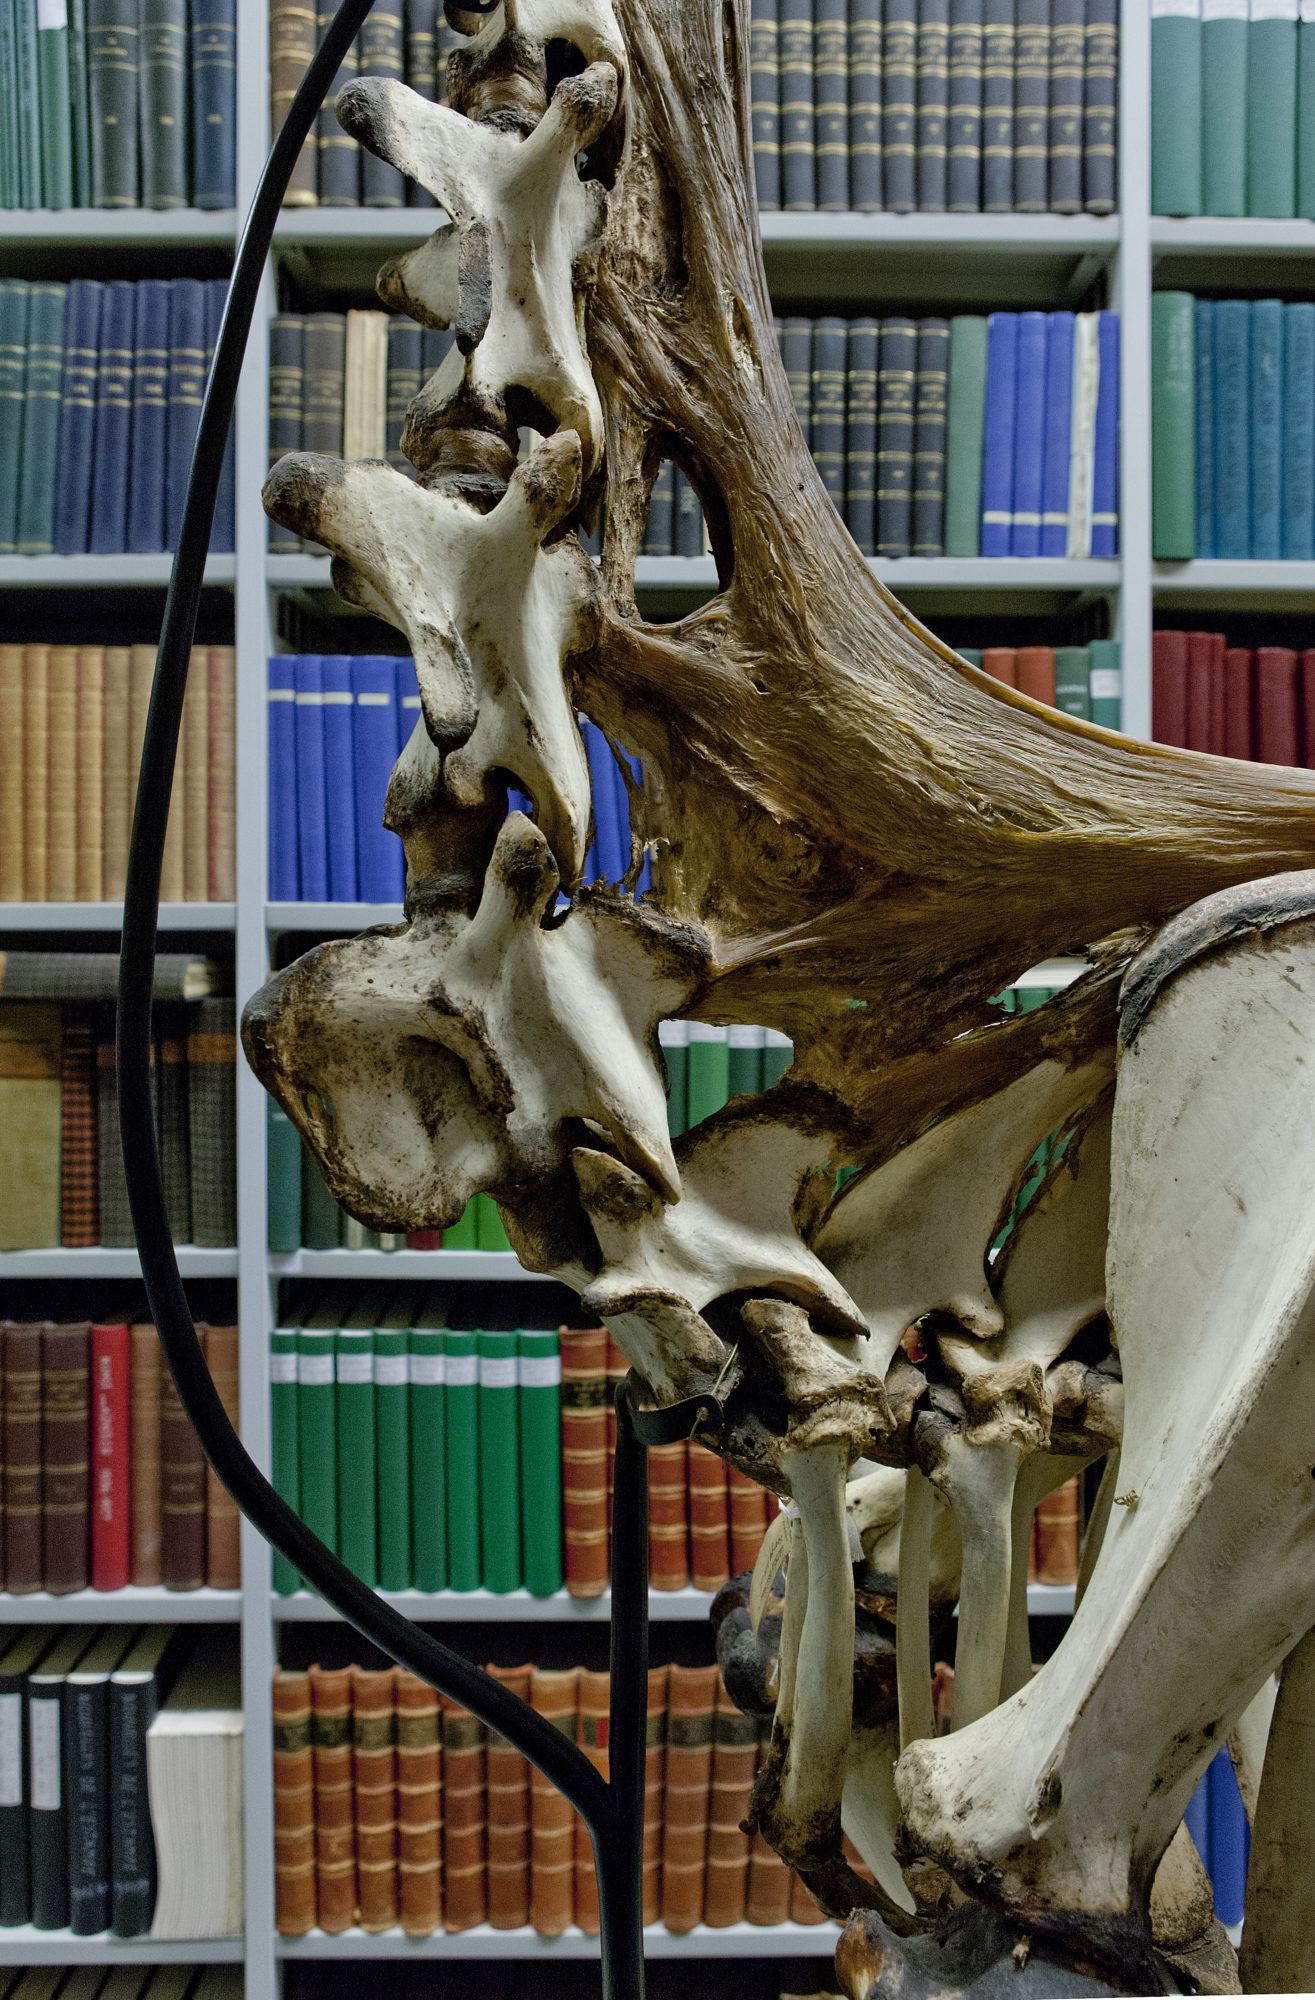 section of animal skeleton with supporting structure and books behind